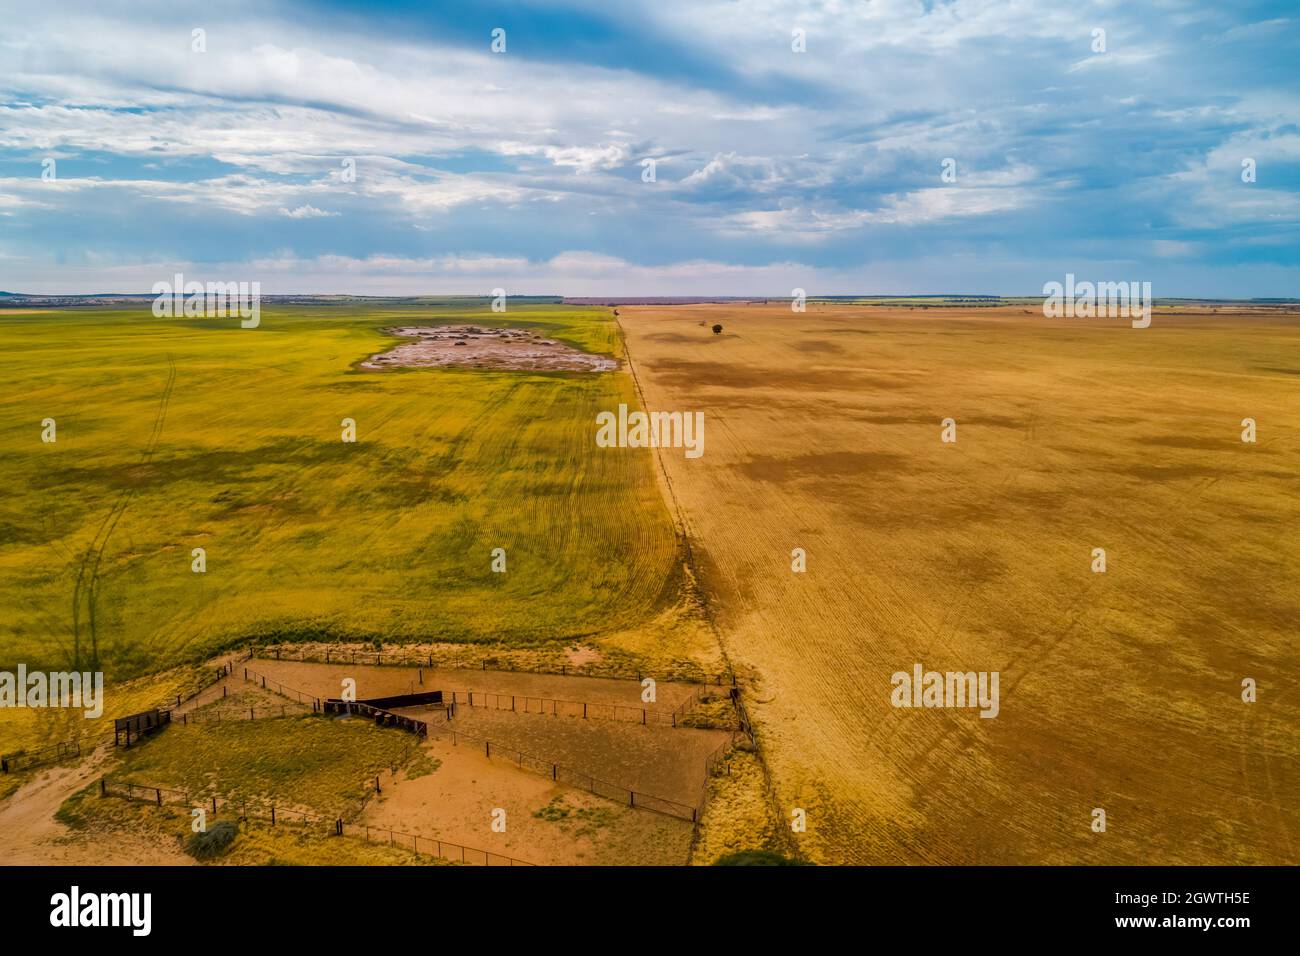 Aerial View Of Agricultural Land In Australia Stock Photo